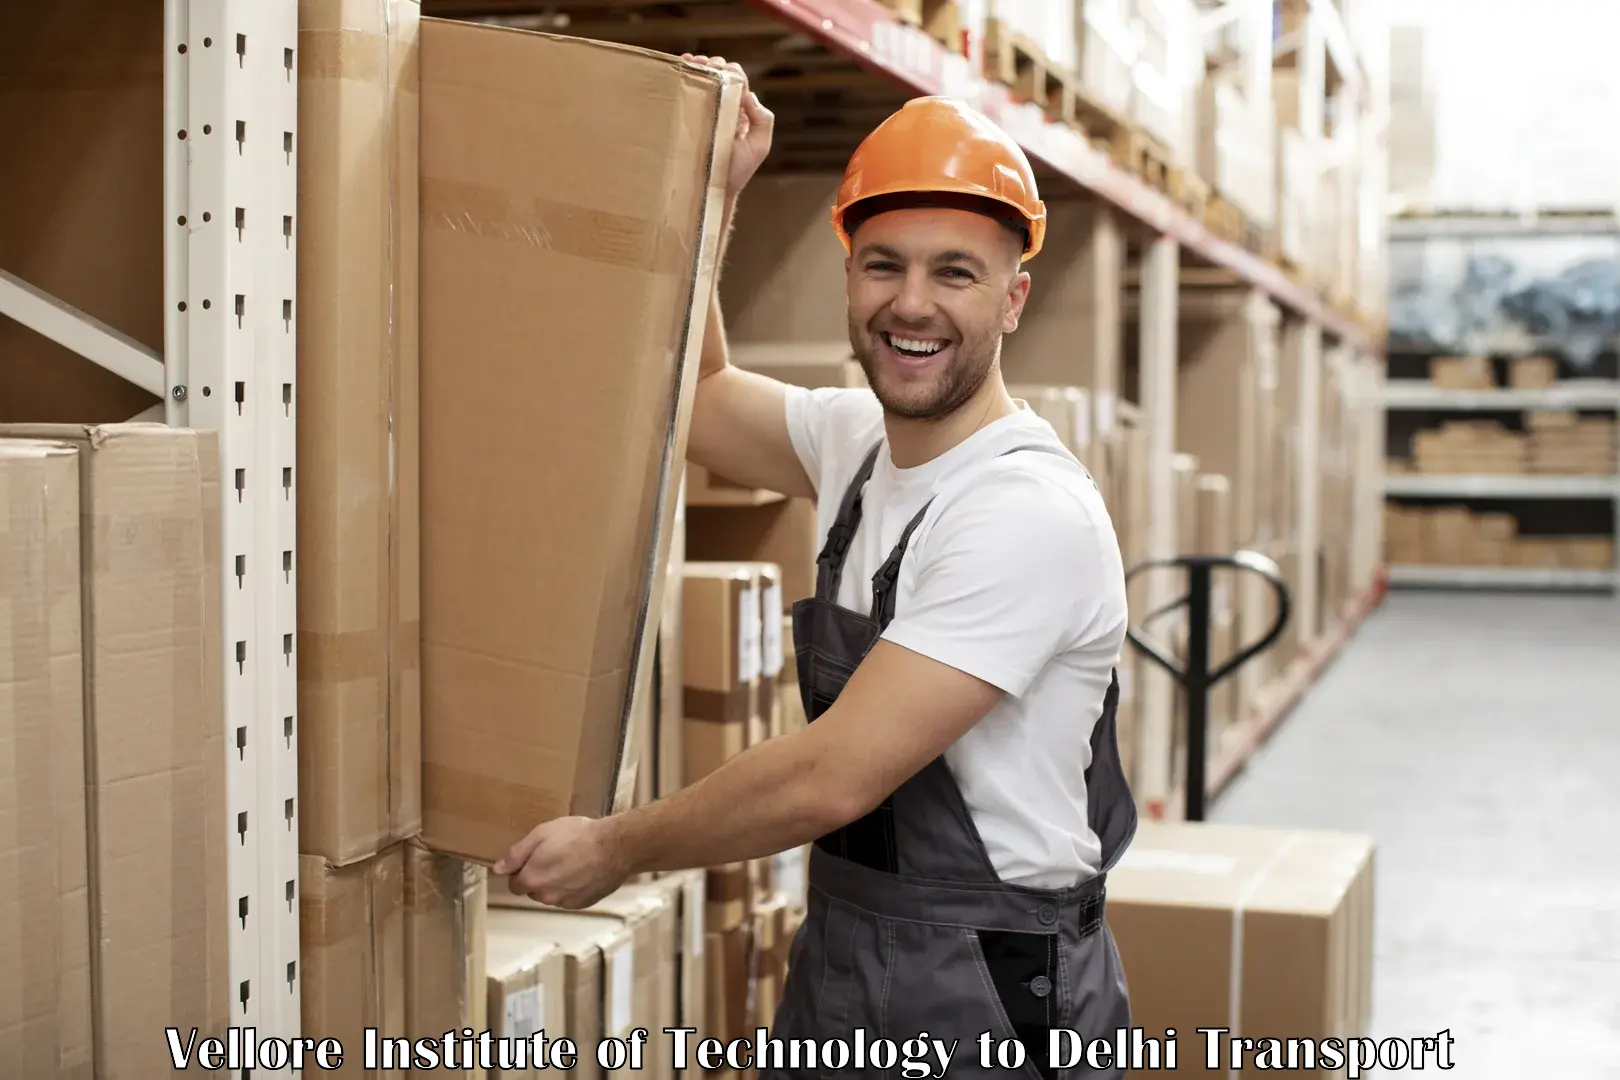 Shipping services Vellore Institute of Technology to Krishna Nagar